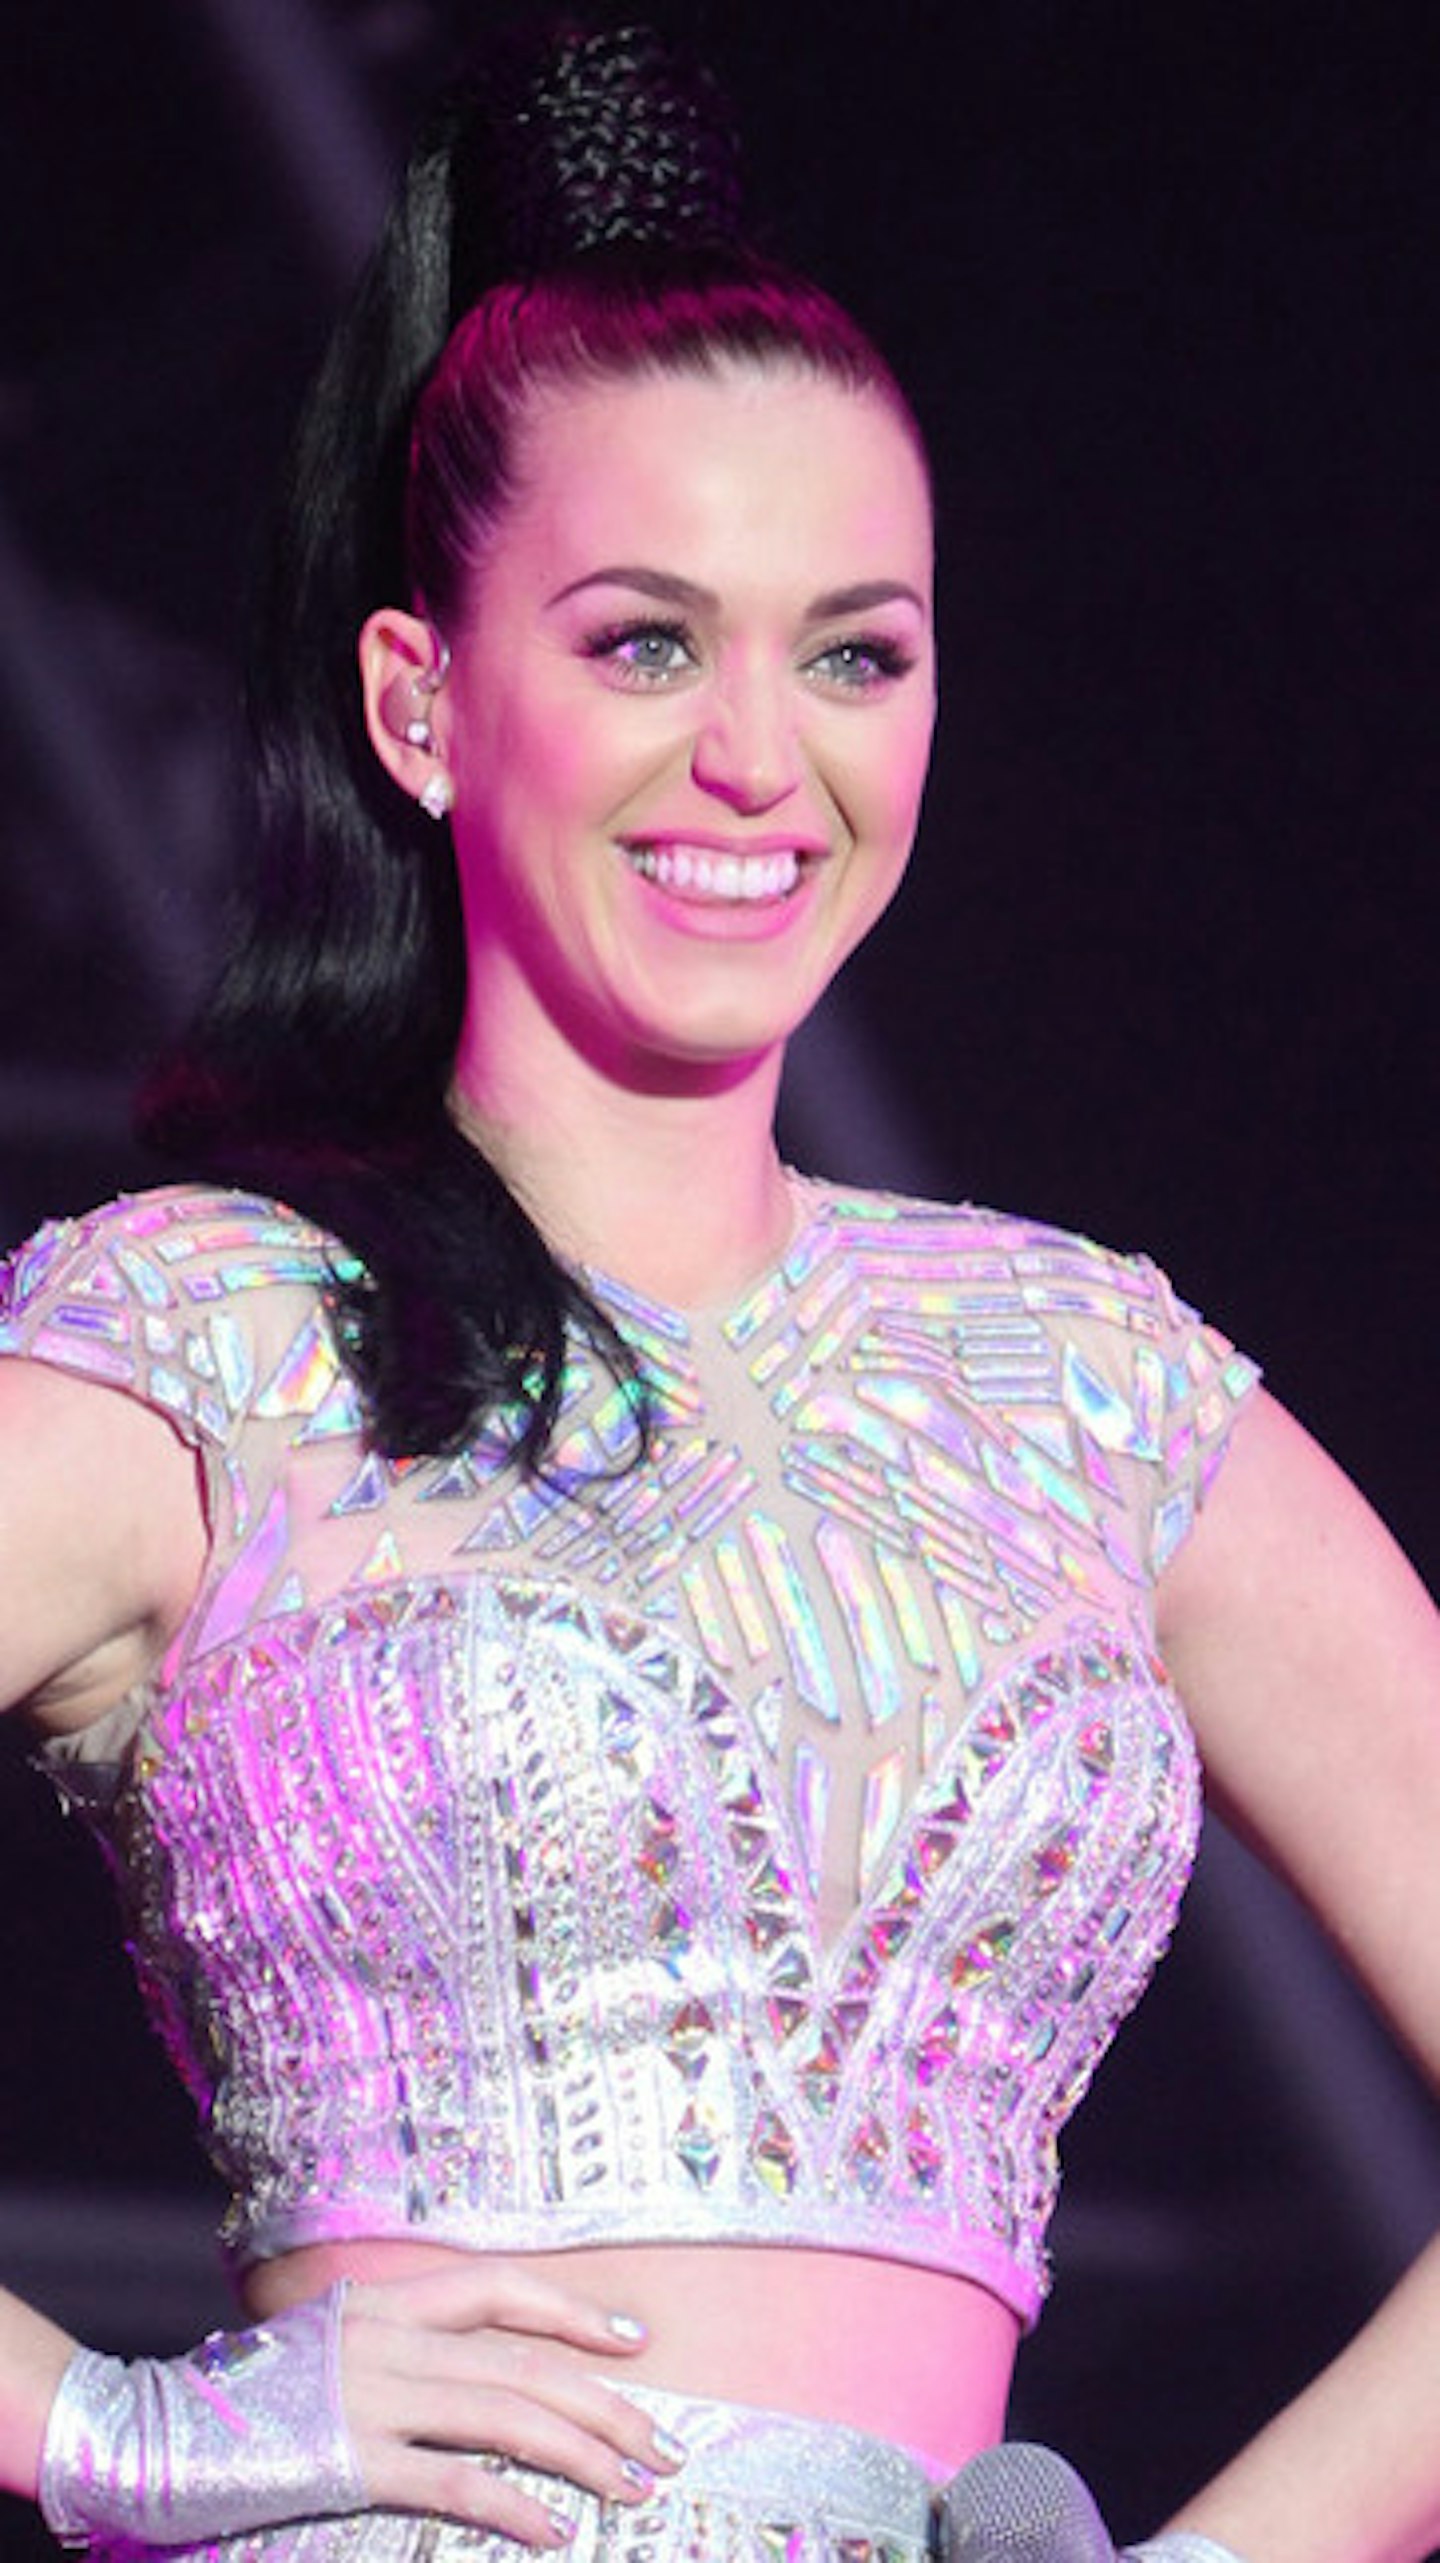 Katy Perry is currently on her world tour